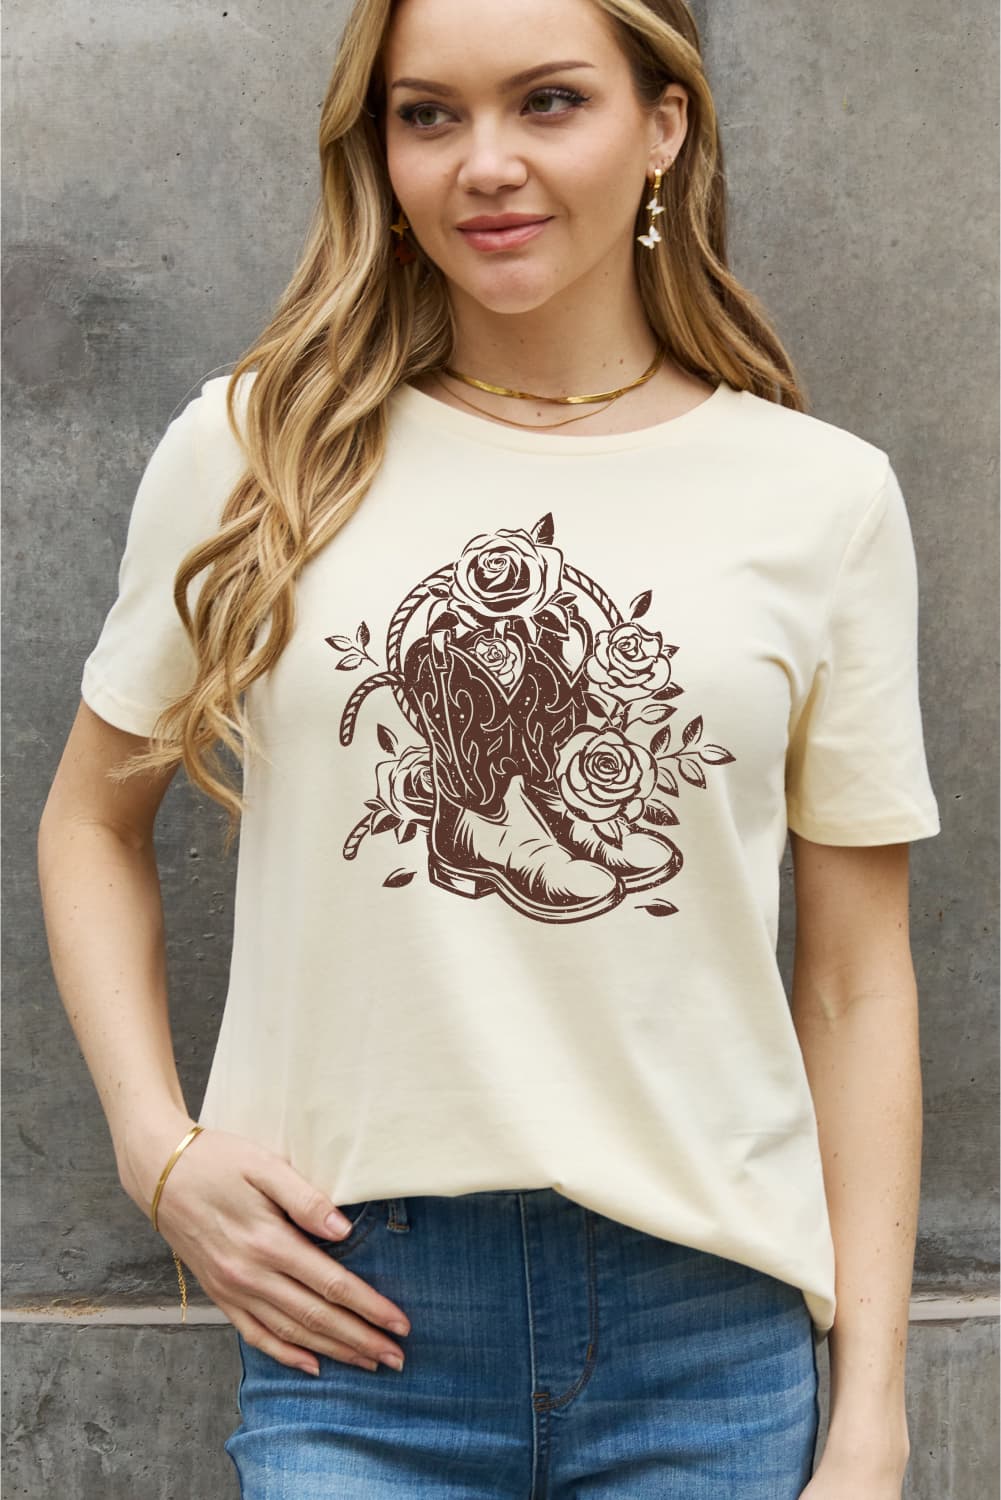 Simply Love Cowboy Boots Flower Graphic Cotton Tee